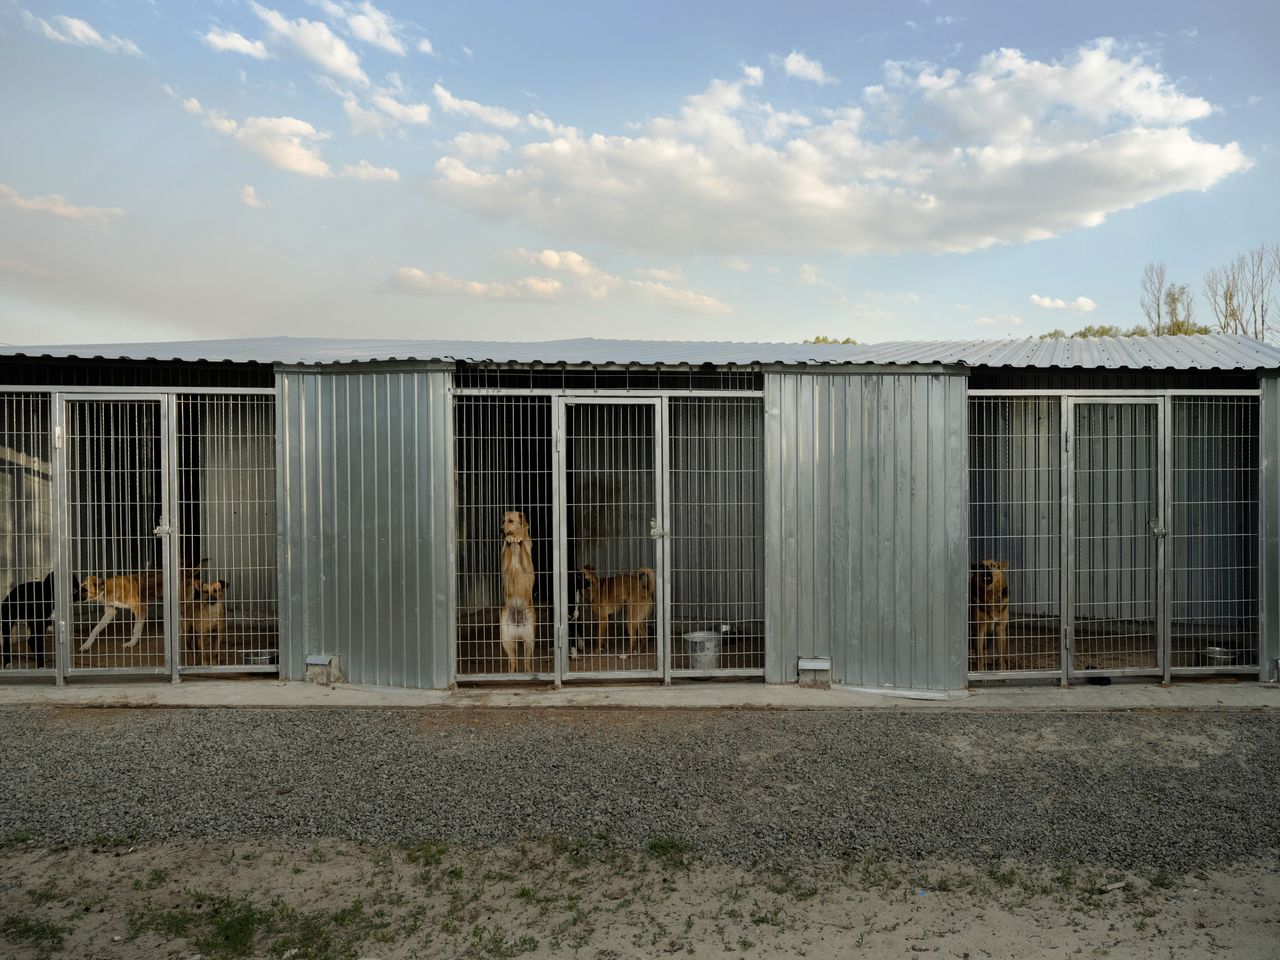 Dogs wait in outdoor shelters at Sirius animal shelter in Fedorivka, Ukraine.